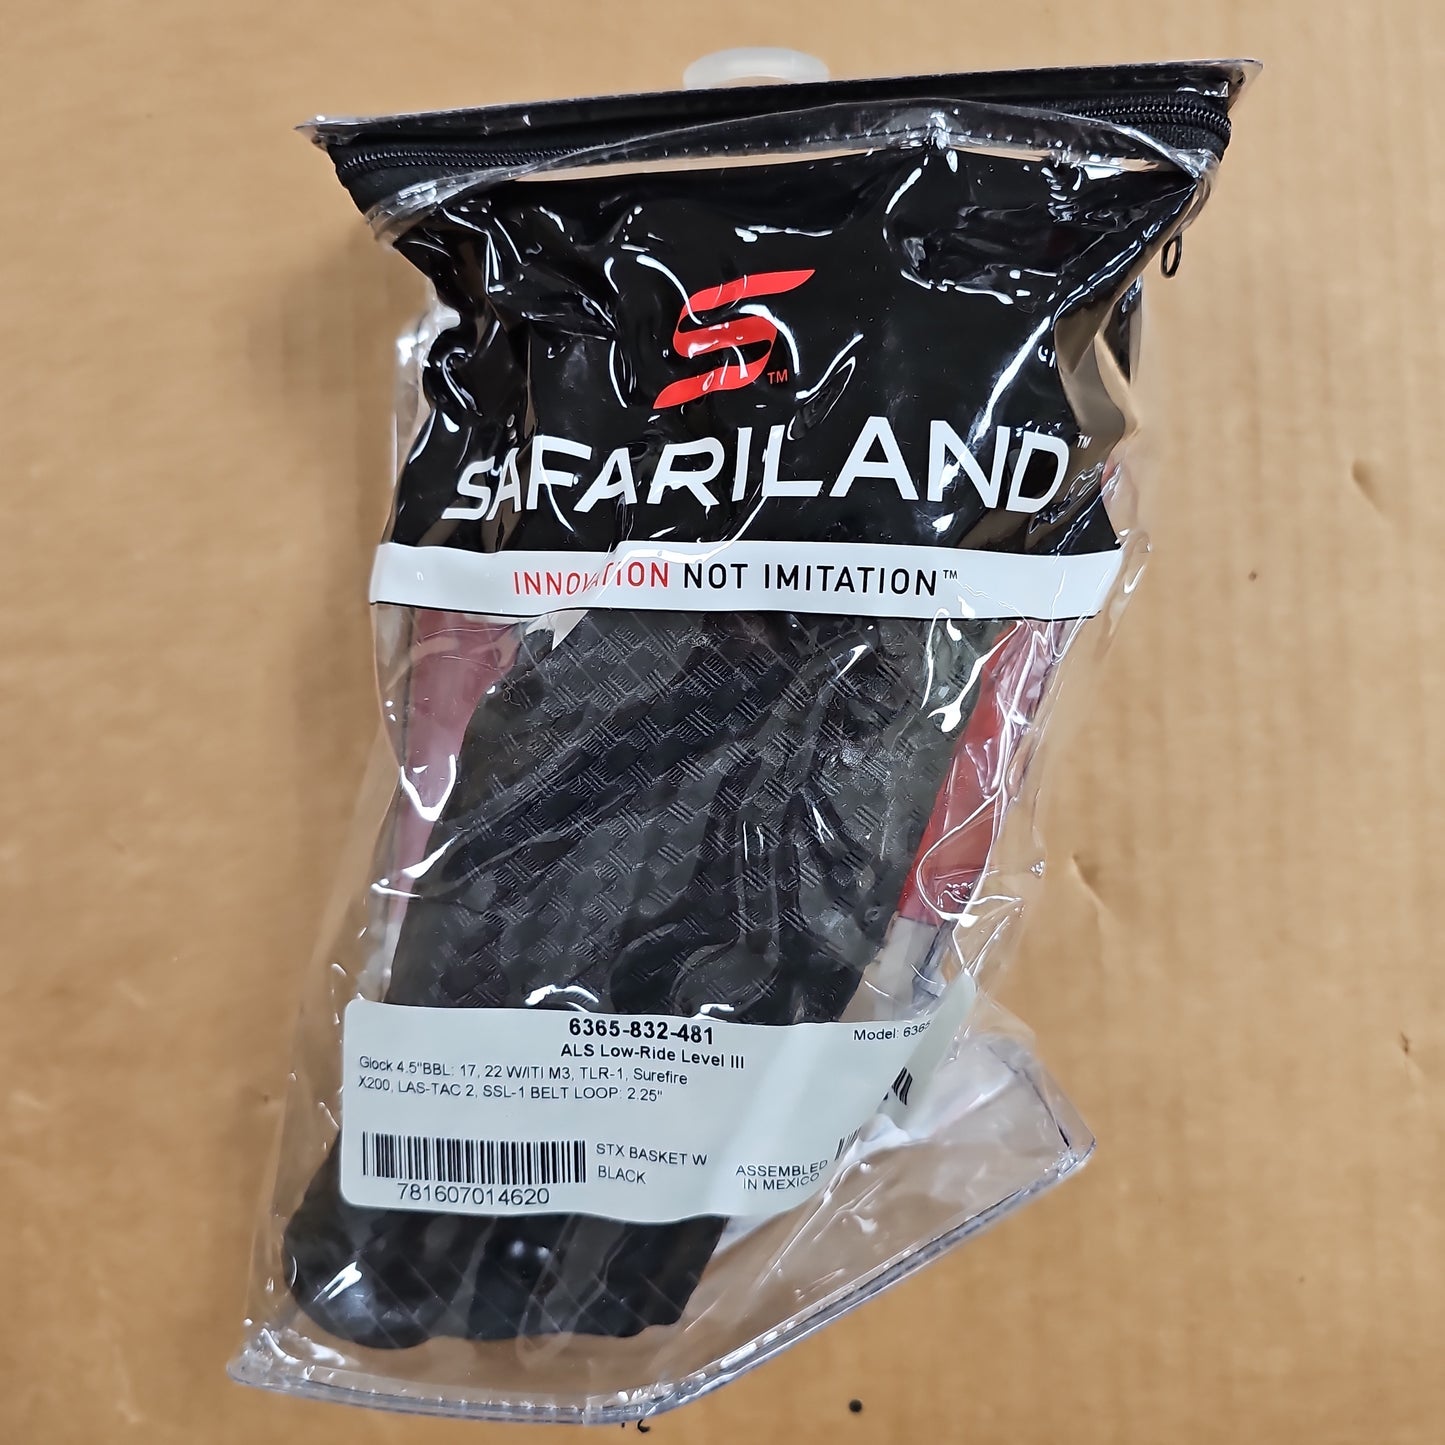 Safariland Holster 6365 ALS 1.5" Drop Basketweave Right Hand for Glock 17 w/M3, X300,TLR1 6365-832-481